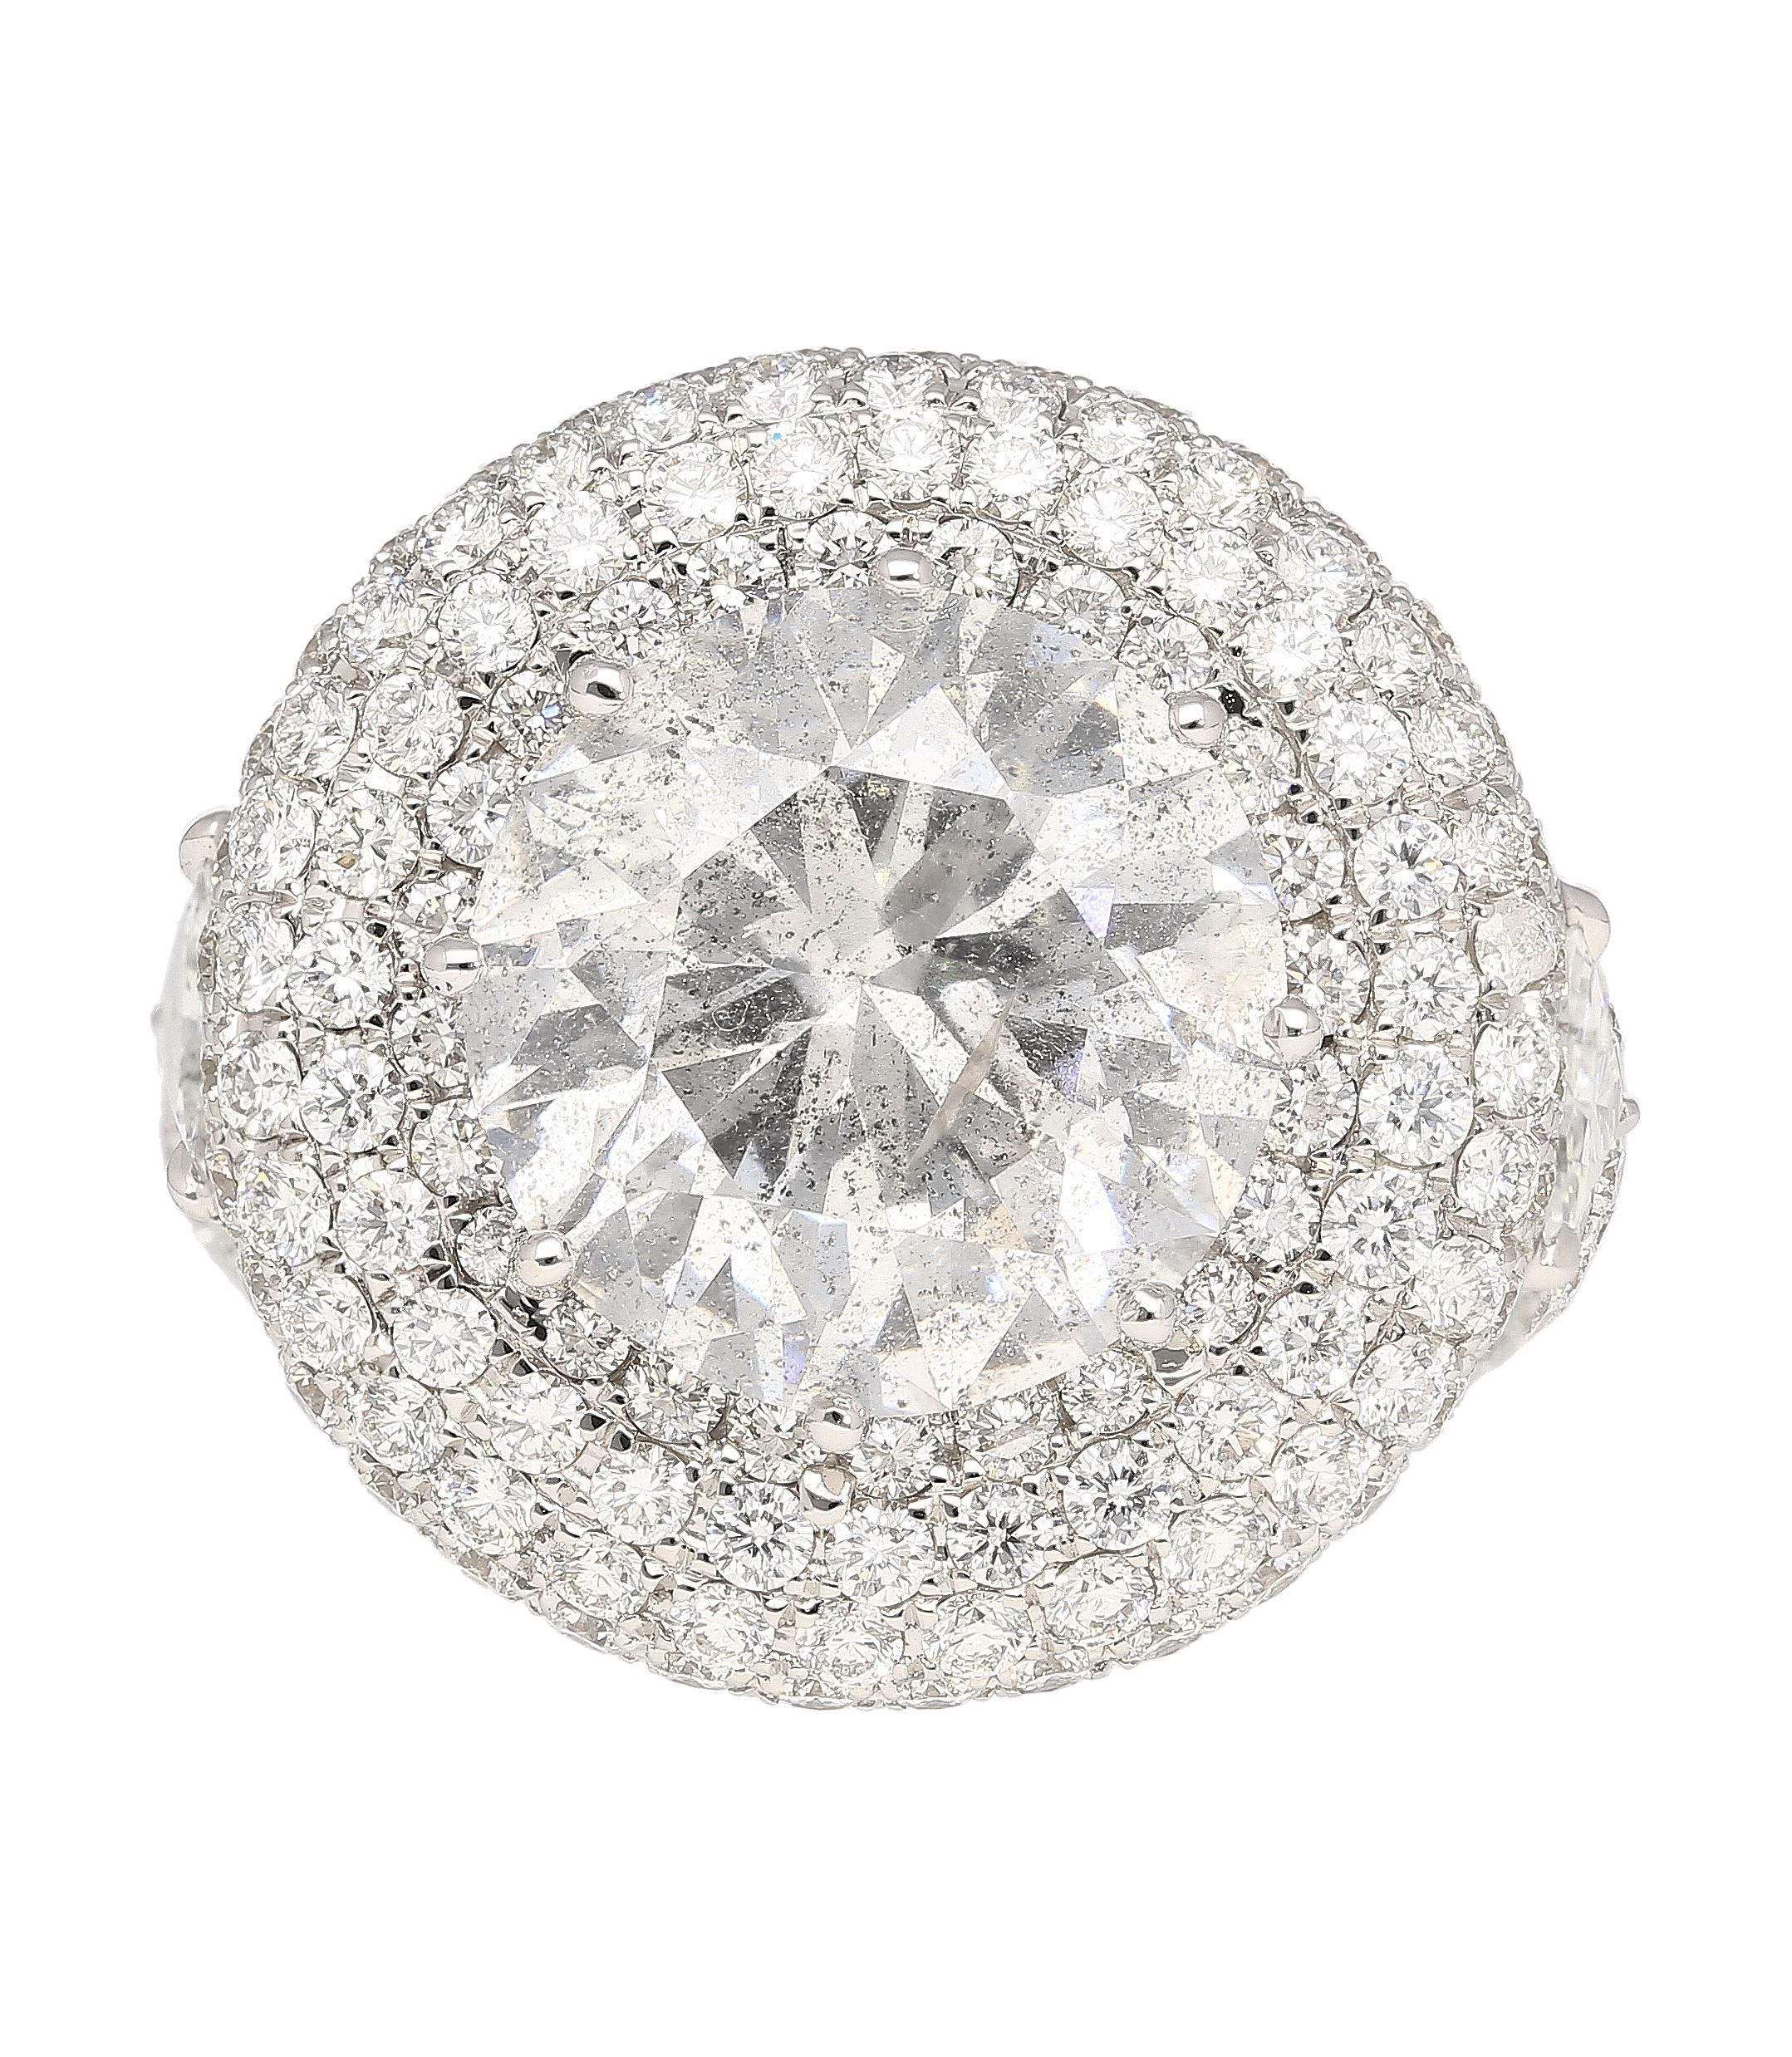 7.71 carat round cut natural diamond cluster ring in 18k white gold with 4.98 carats in white pave set diamonds.

The ring is further adorned with two Trillion-cut Diamonds (0.58CTTW) on the sides, adding a touch of sophistication. Additionally, 291